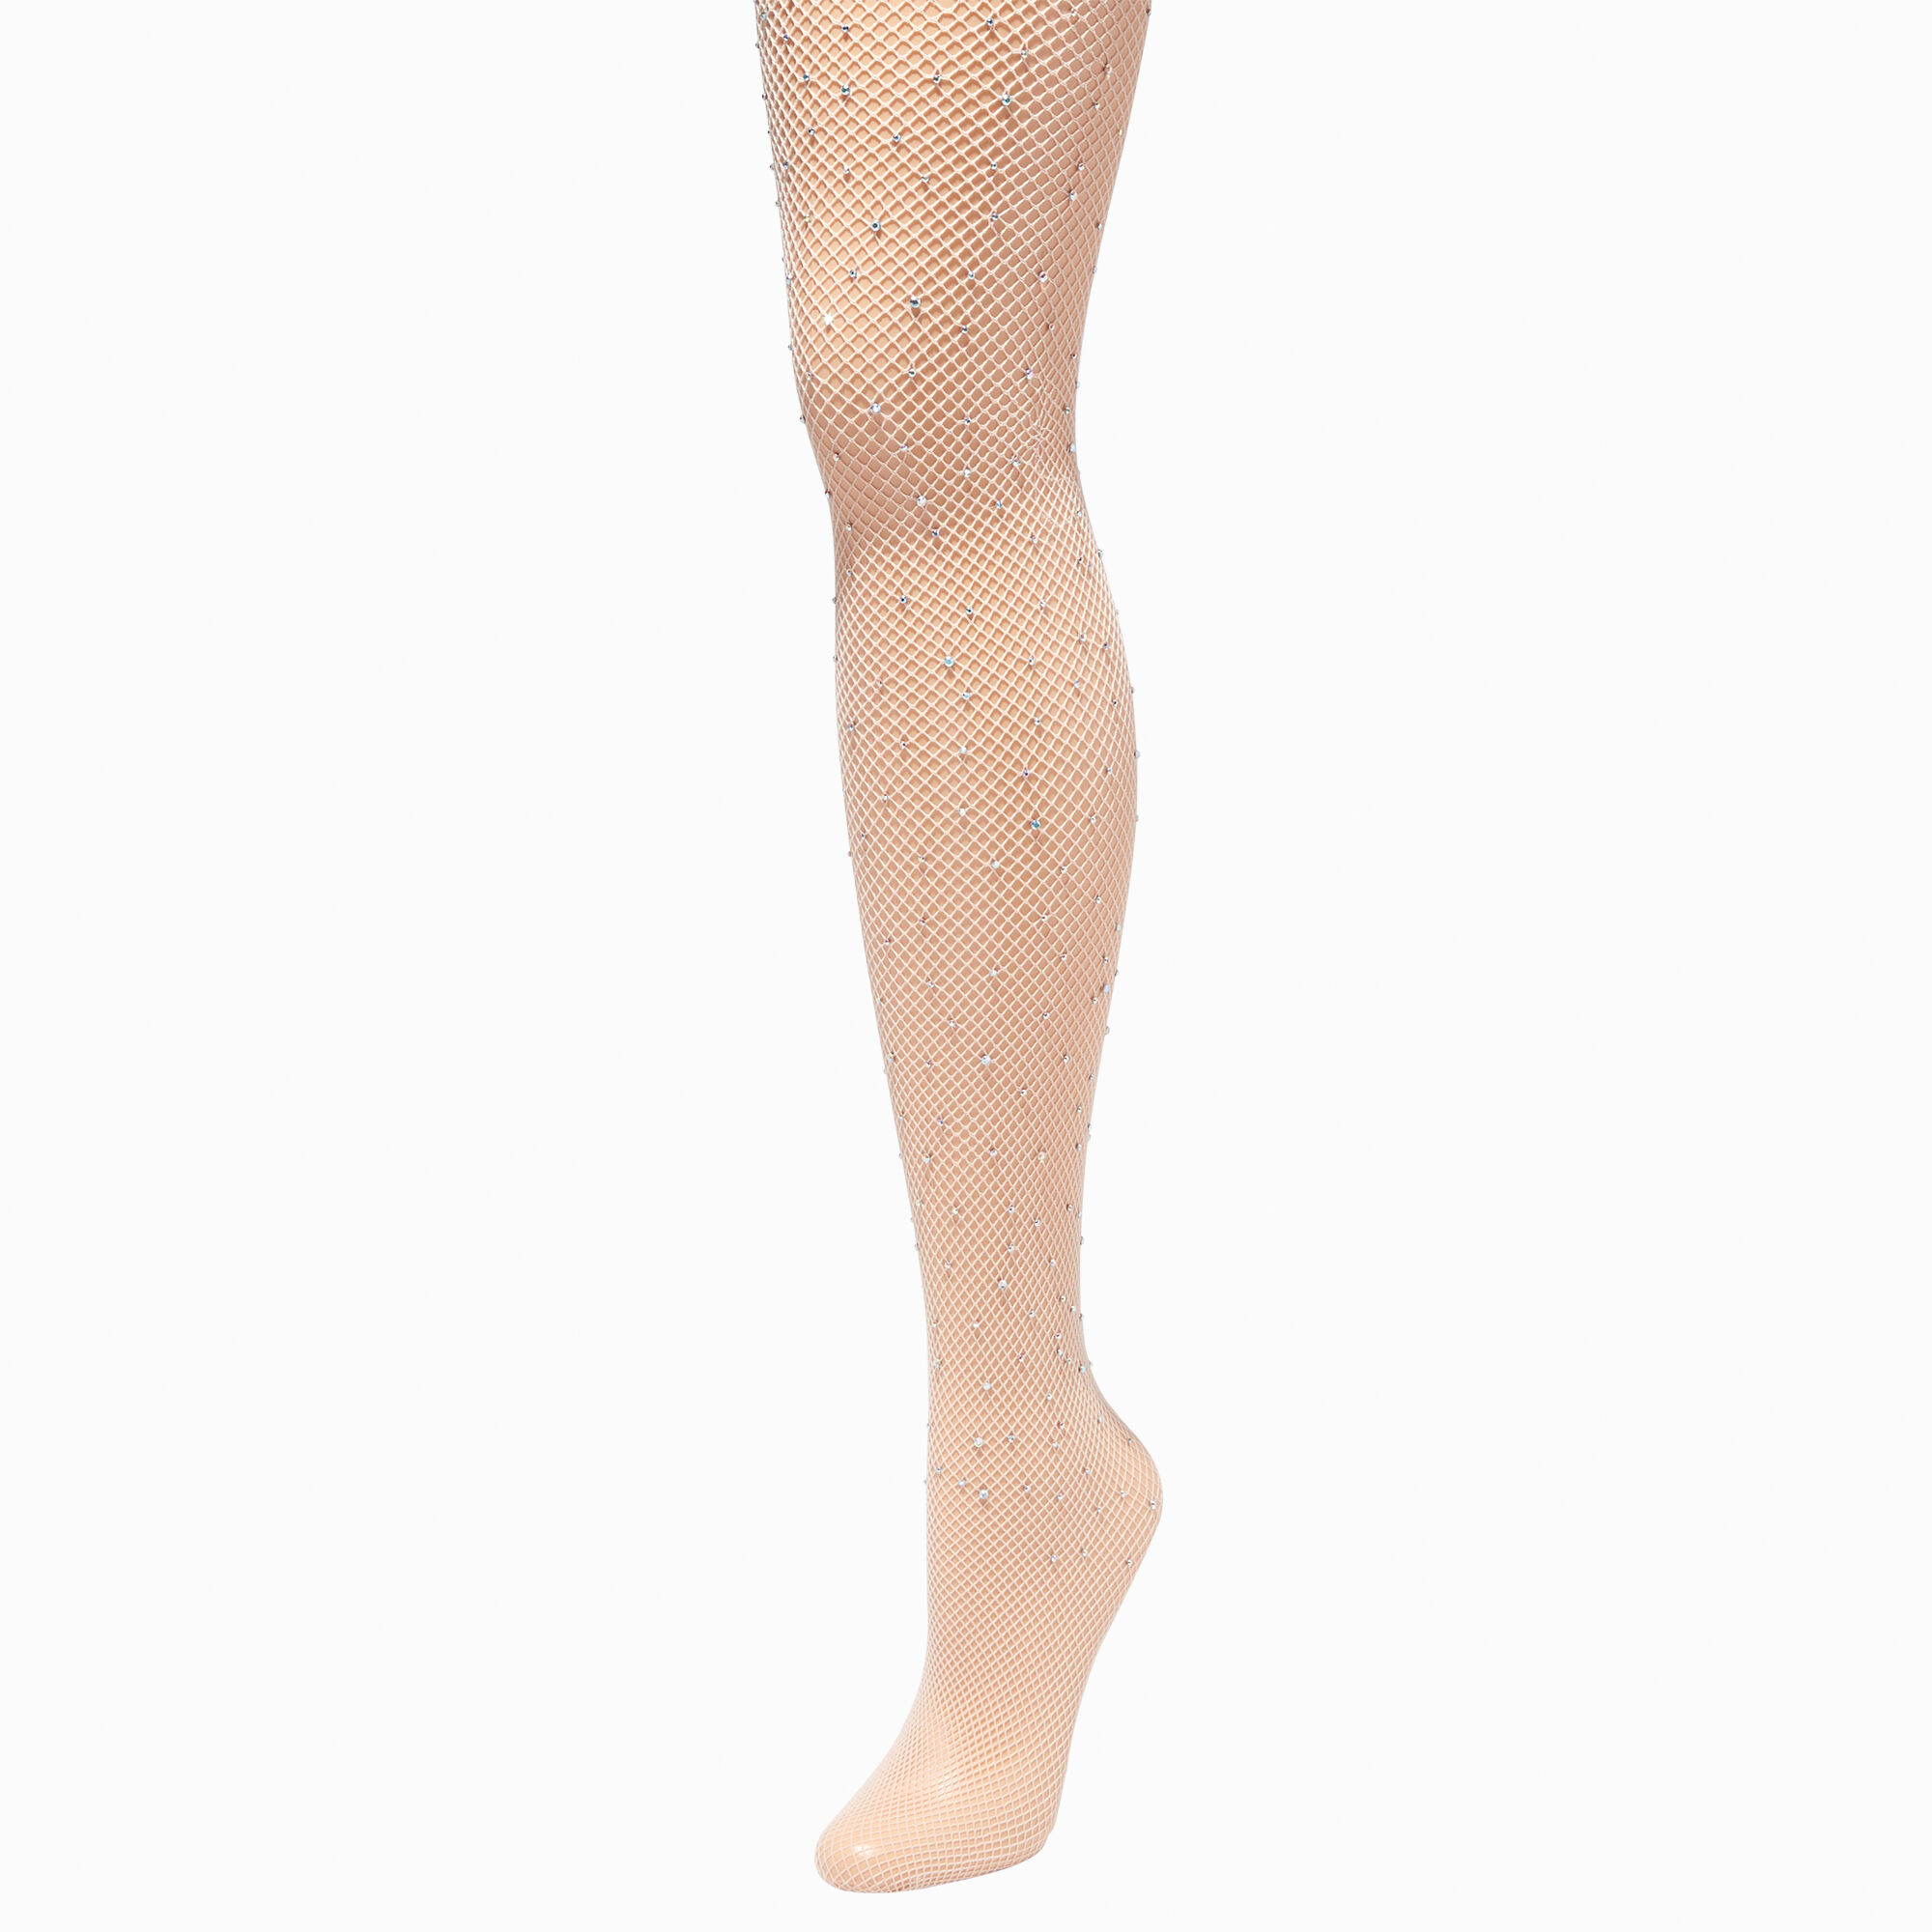 View Claires Rhinestone Nude Fishnet Tights Size Ml information